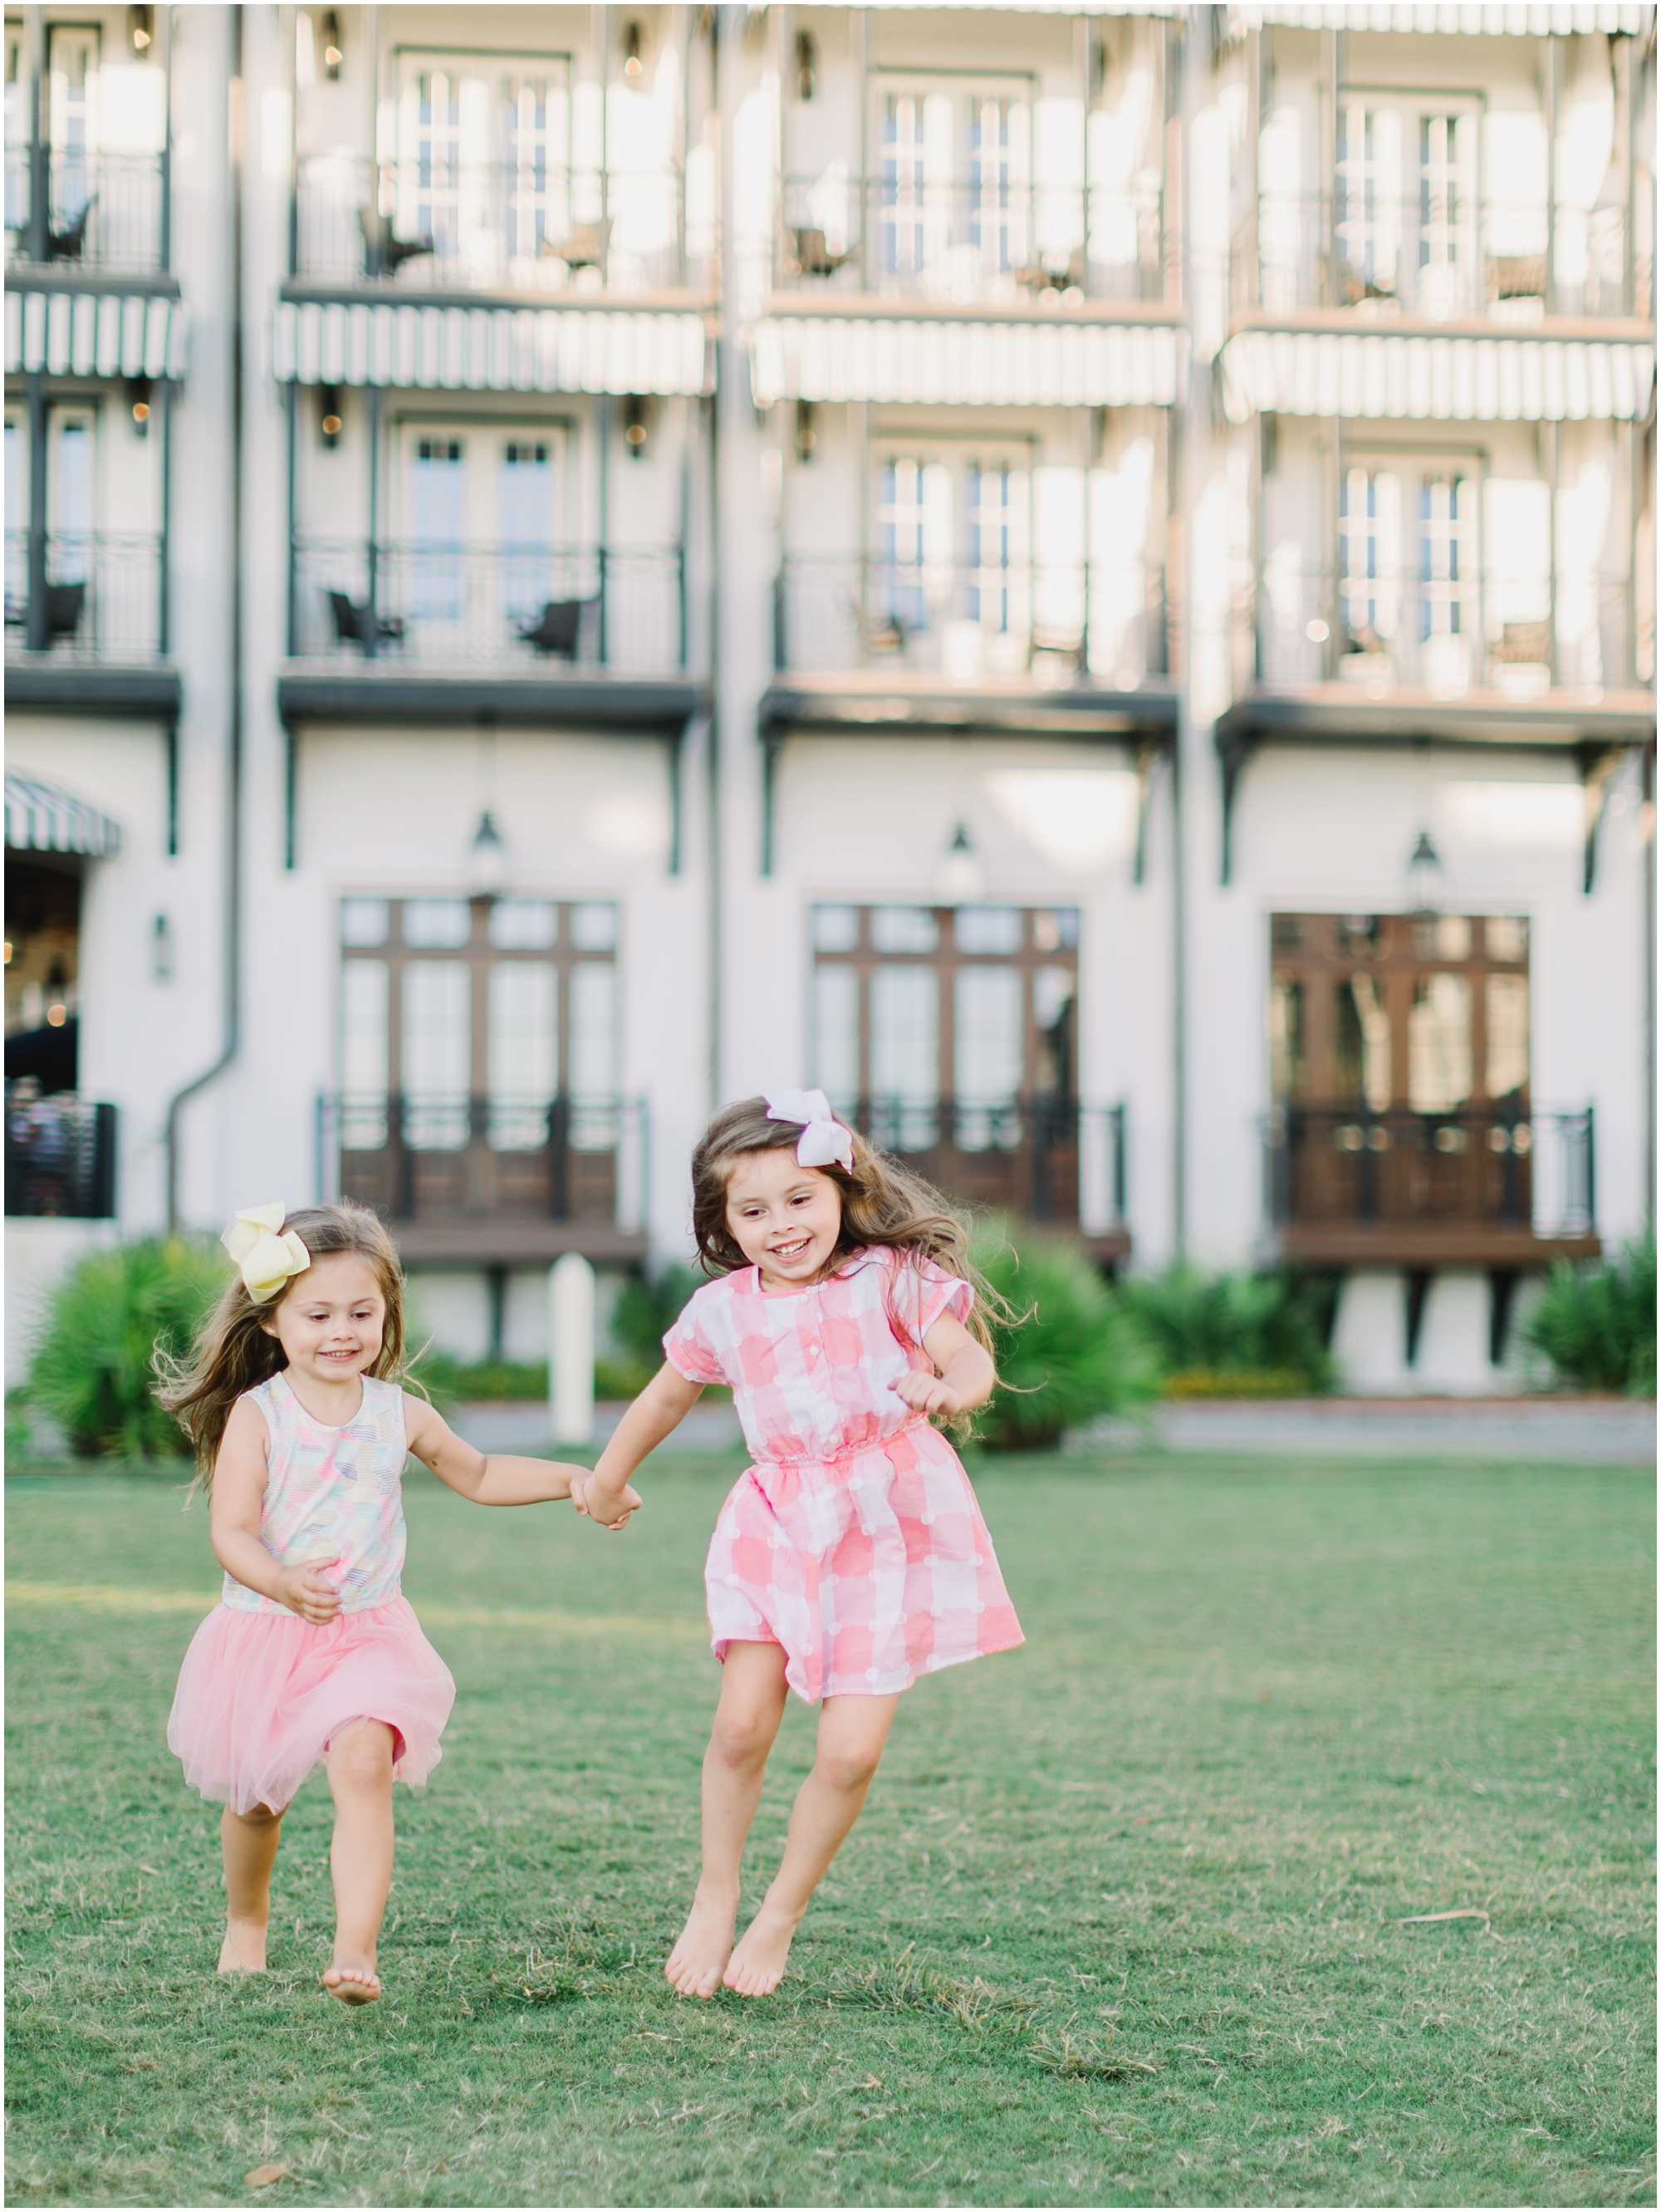 30A photographer families engagements weddings amy riley photography